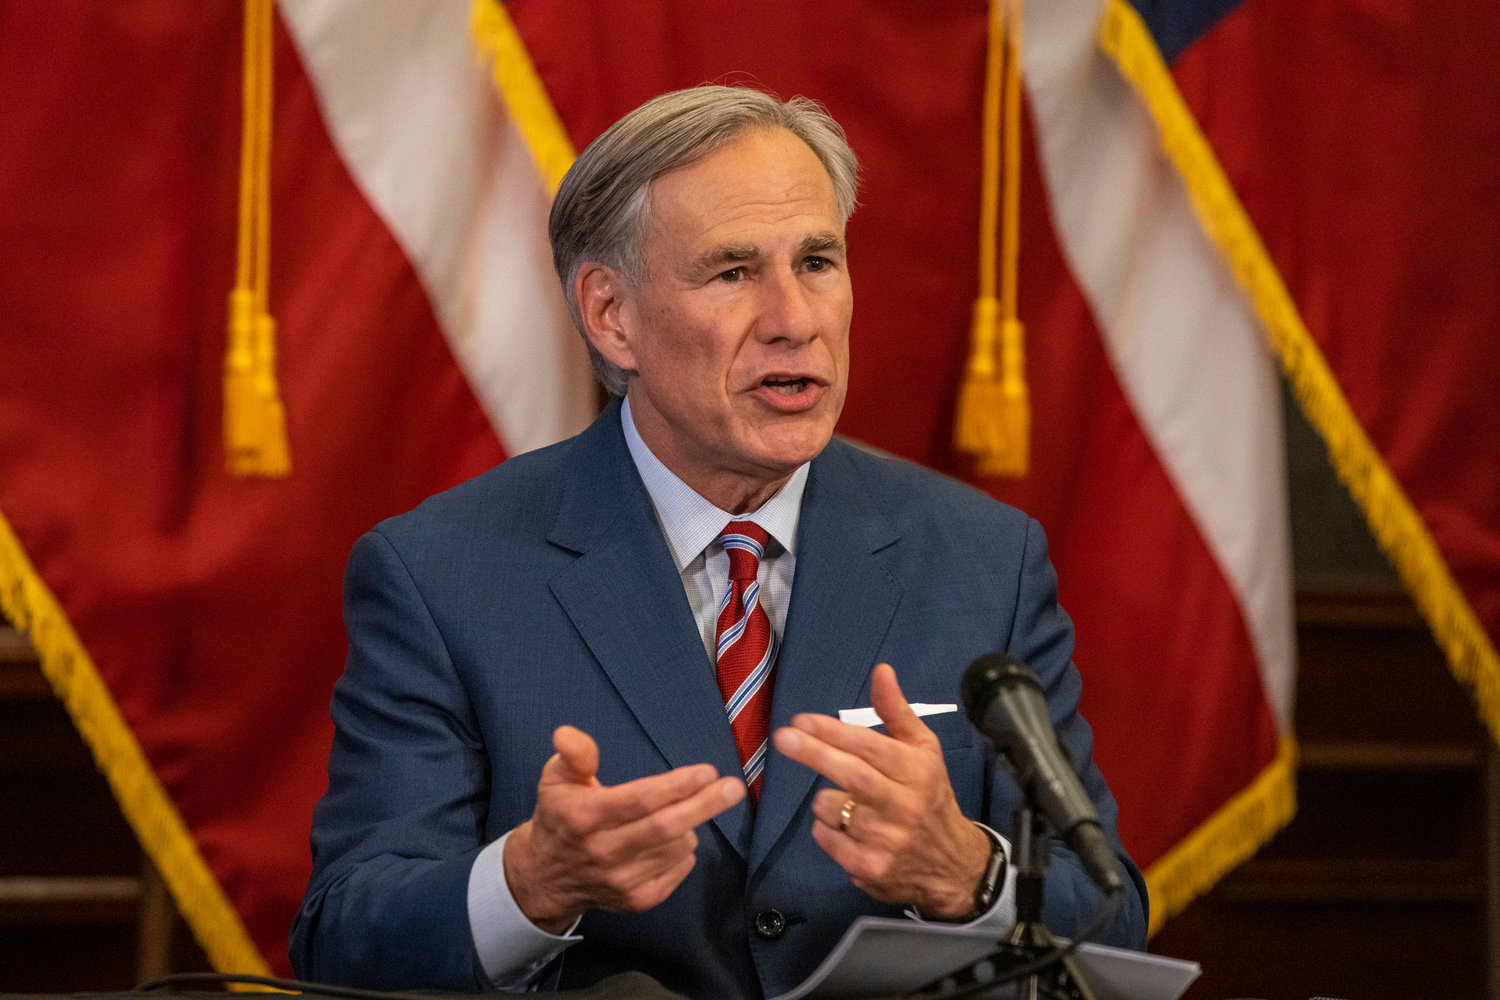 Texas Gov. Greg Abbott at the Texas State Capitol on  May 18, 2020, in Austin, Texas. (Lynda M. Gonzalez/Pool/Getty Images/TNS)